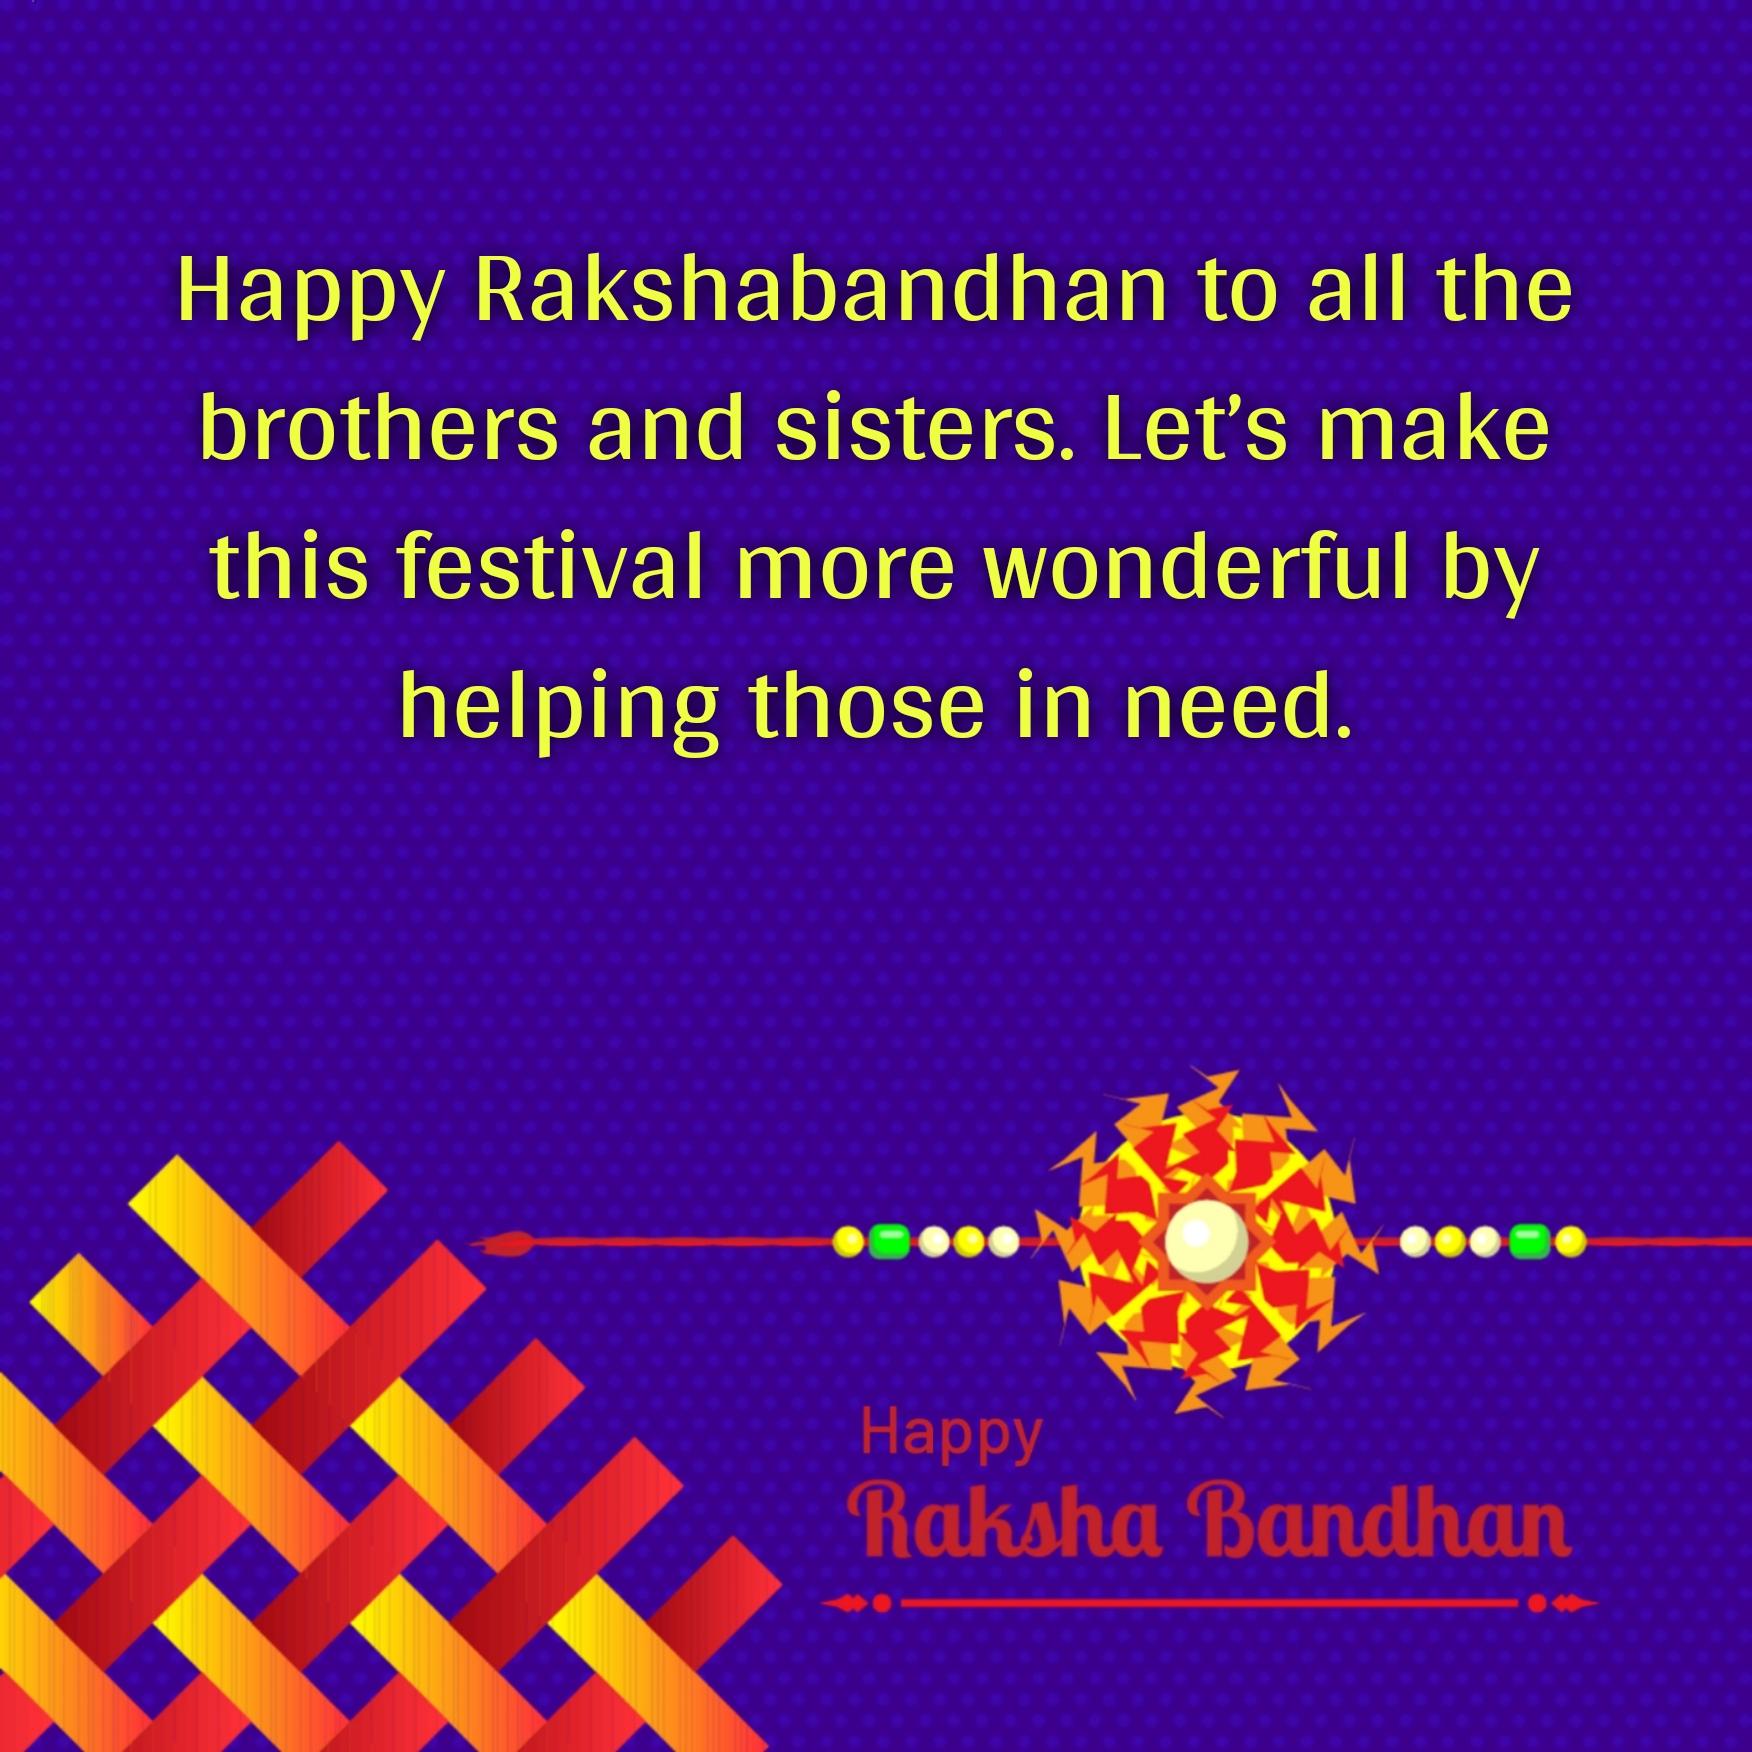 Happy Rakshabandhan to all the brothers and sisters